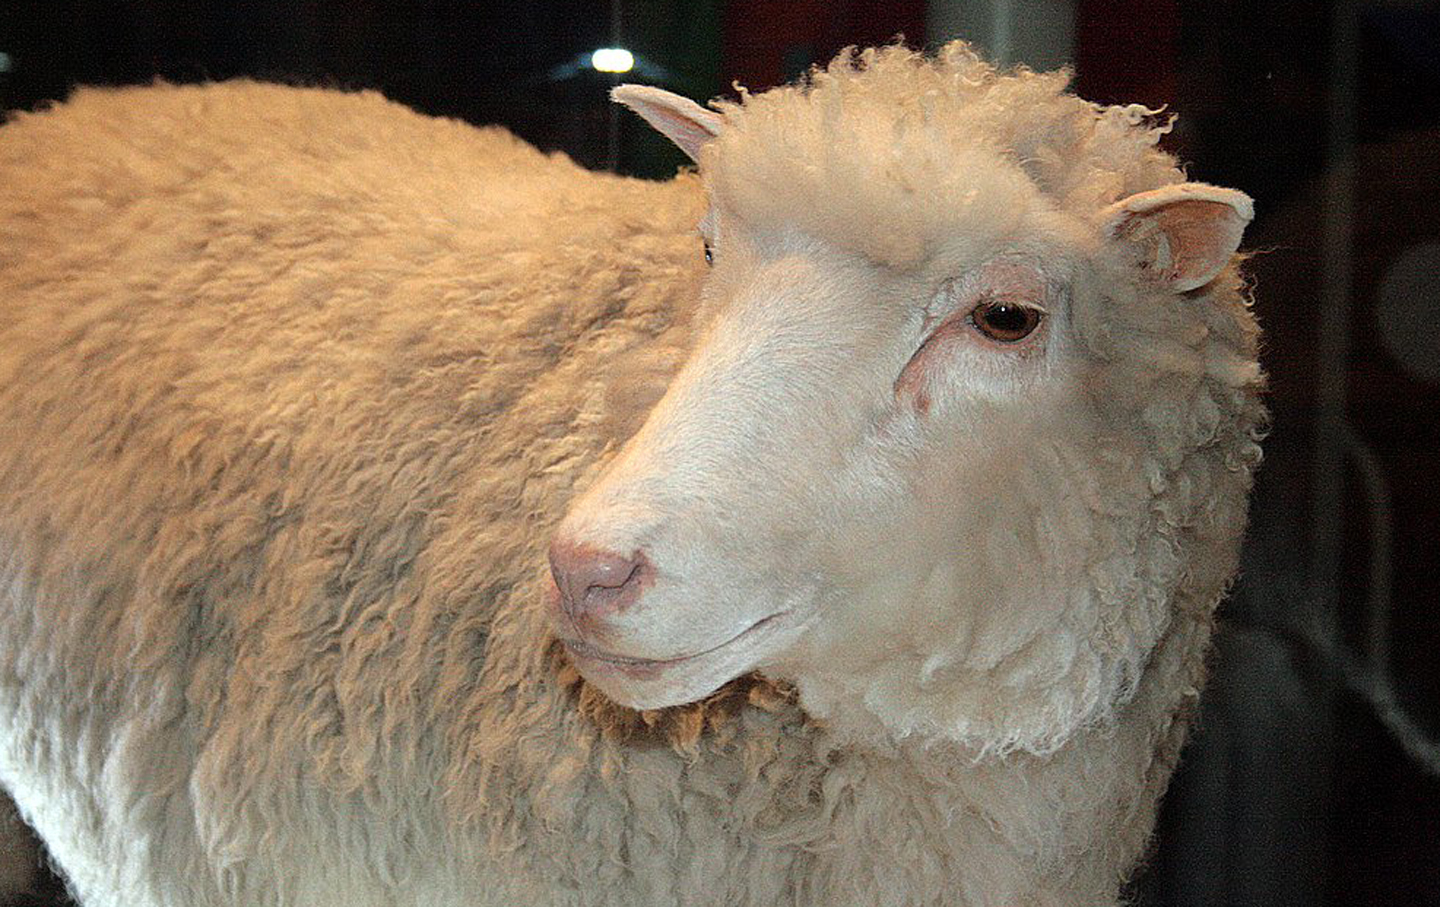 July 5, 1996: Dolly the Sheep Is Born, the First Mammal Produced by Cloning